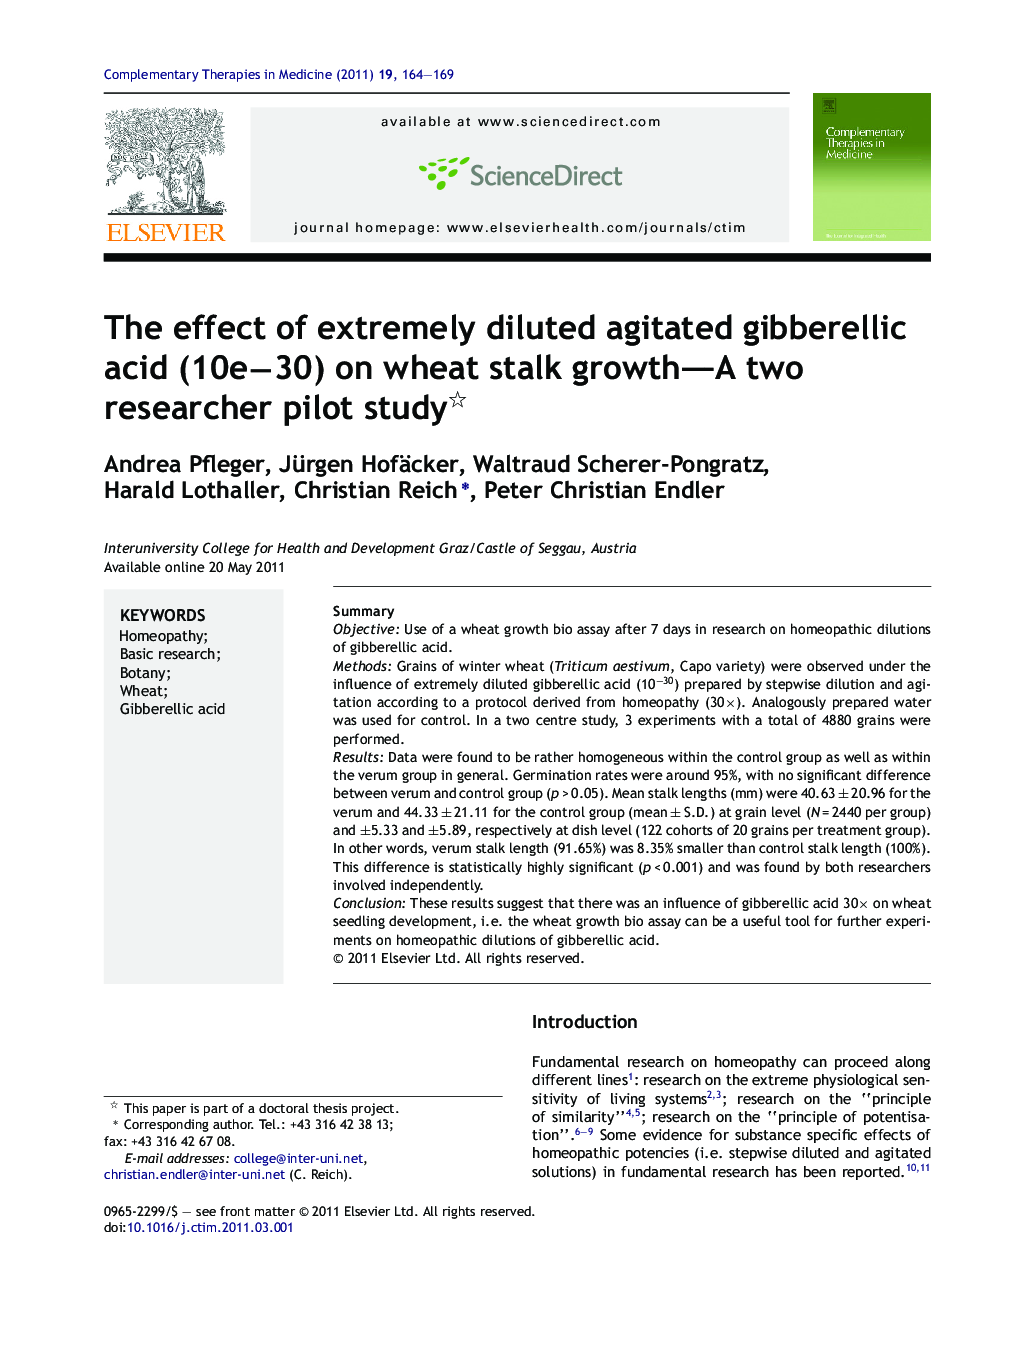 The effect of extremely diluted agitated gibberellic acid (10e−30) on wheat stalk growth—A two researcher pilot study 